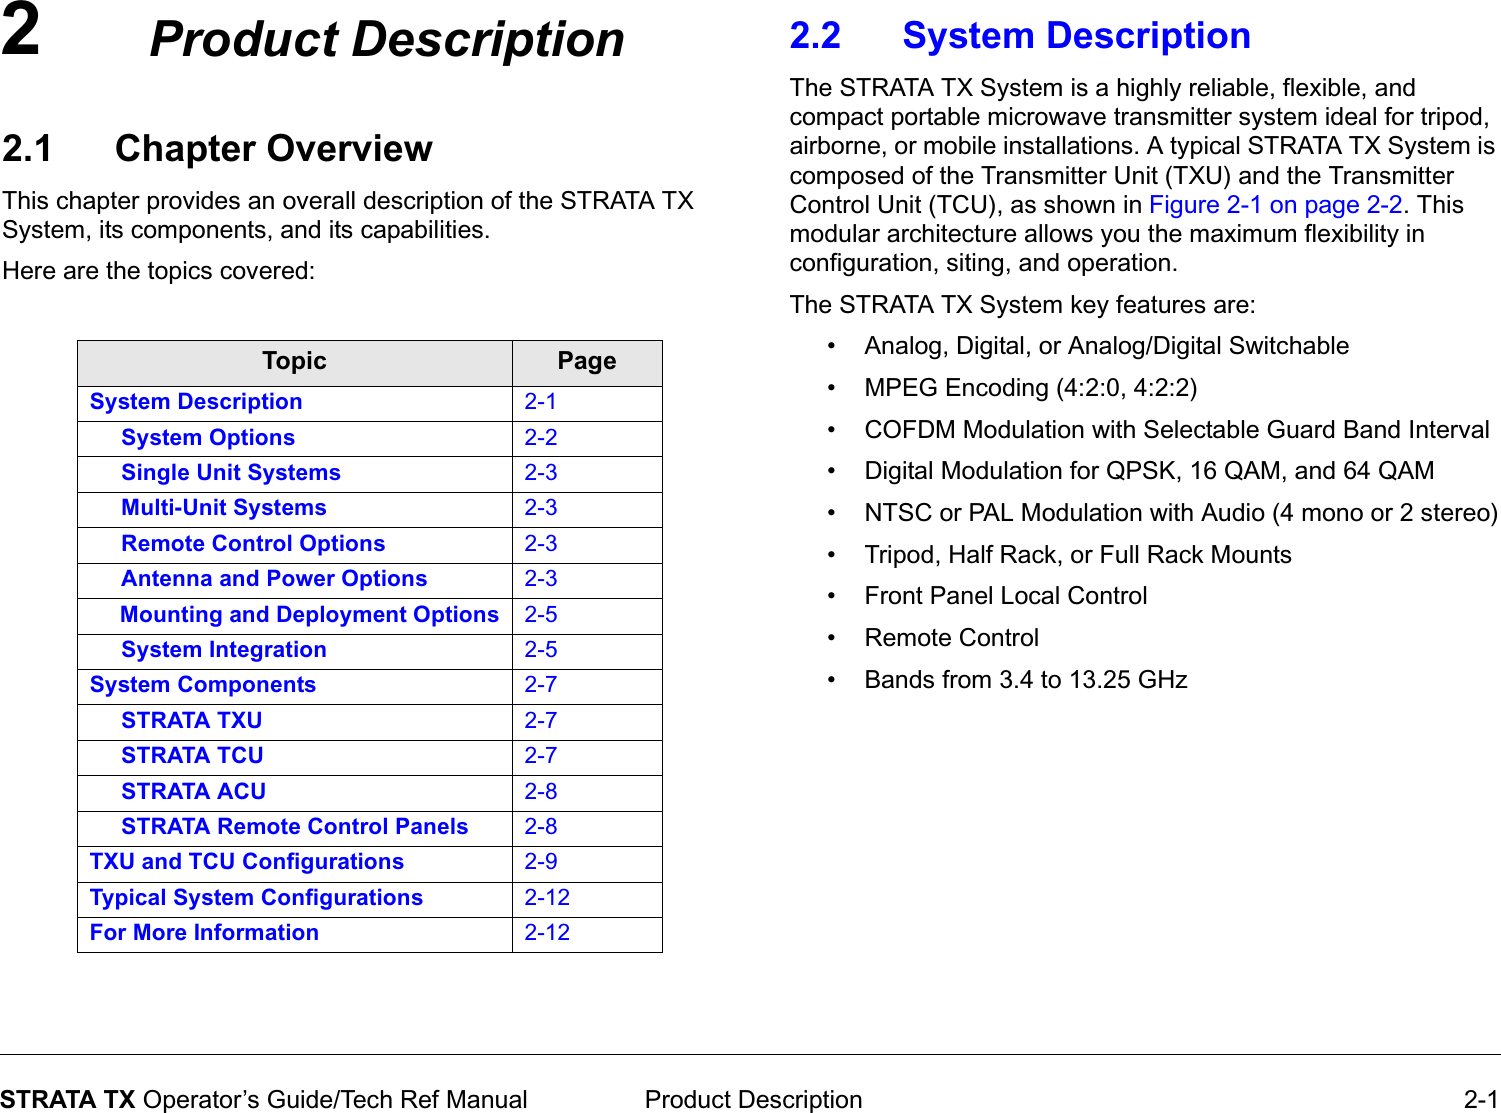 2 Product Description 2-1STRATA TX Operator’s Guide/Tech Ref ManualProduct Description2.1 Chapter OverviewThis chapter provides an overall description of the STRATA TX System, its components, and its capabilities. Here are the topics covered:Topic PageSystem Description 2-1     System Options 2-2     Single Unit Systems 2-3     Multi-Unit Systems 2-3     Remote Control Options 2-3     Antenna and Power Options 2-3     Mounting and Deployment Options 2-5     System Integration 2-5System Components 2-7     STRATA TXU 2-7     STRATA TCU 2-7     STRATA ACU 2-8     STRATA Remote Control Panels 2-8TXU and TCU Configurations 2-9Typical System Configurations 2-12For More Information 2-122.2 System Description The STRATA TX System is a highly reliable, flexible, and compact portable microwave transmitter system ideal for tripod, airborne, or mobile installations. A typical STRATA TX System is composed of the Transmitter Unit (TXU) and the Transmitter Control Unit (TCU), as shown in Figure 2-1 on page 2-2. This modular architecture allows you the maximum flexibility in configuration, siting, and operation.The STRATA TX System key features are:• Analog, Digital, or Analog/Digital Switchable• MPEG Encoding (4:2:0, 4:2:2)• COFDM Modulation with Selectable Guard Band Interval• Digital Modulation for QPSK, 16 QAM, and 64 QAM• NTSC or PAL Modulation with Audio (4 mono or 2 stereo)• Tripod, Half Rack, or Full Rack Mounts• Front Panel Local Control• Remote Control• Bands from 3.4 to 13.25 GHz